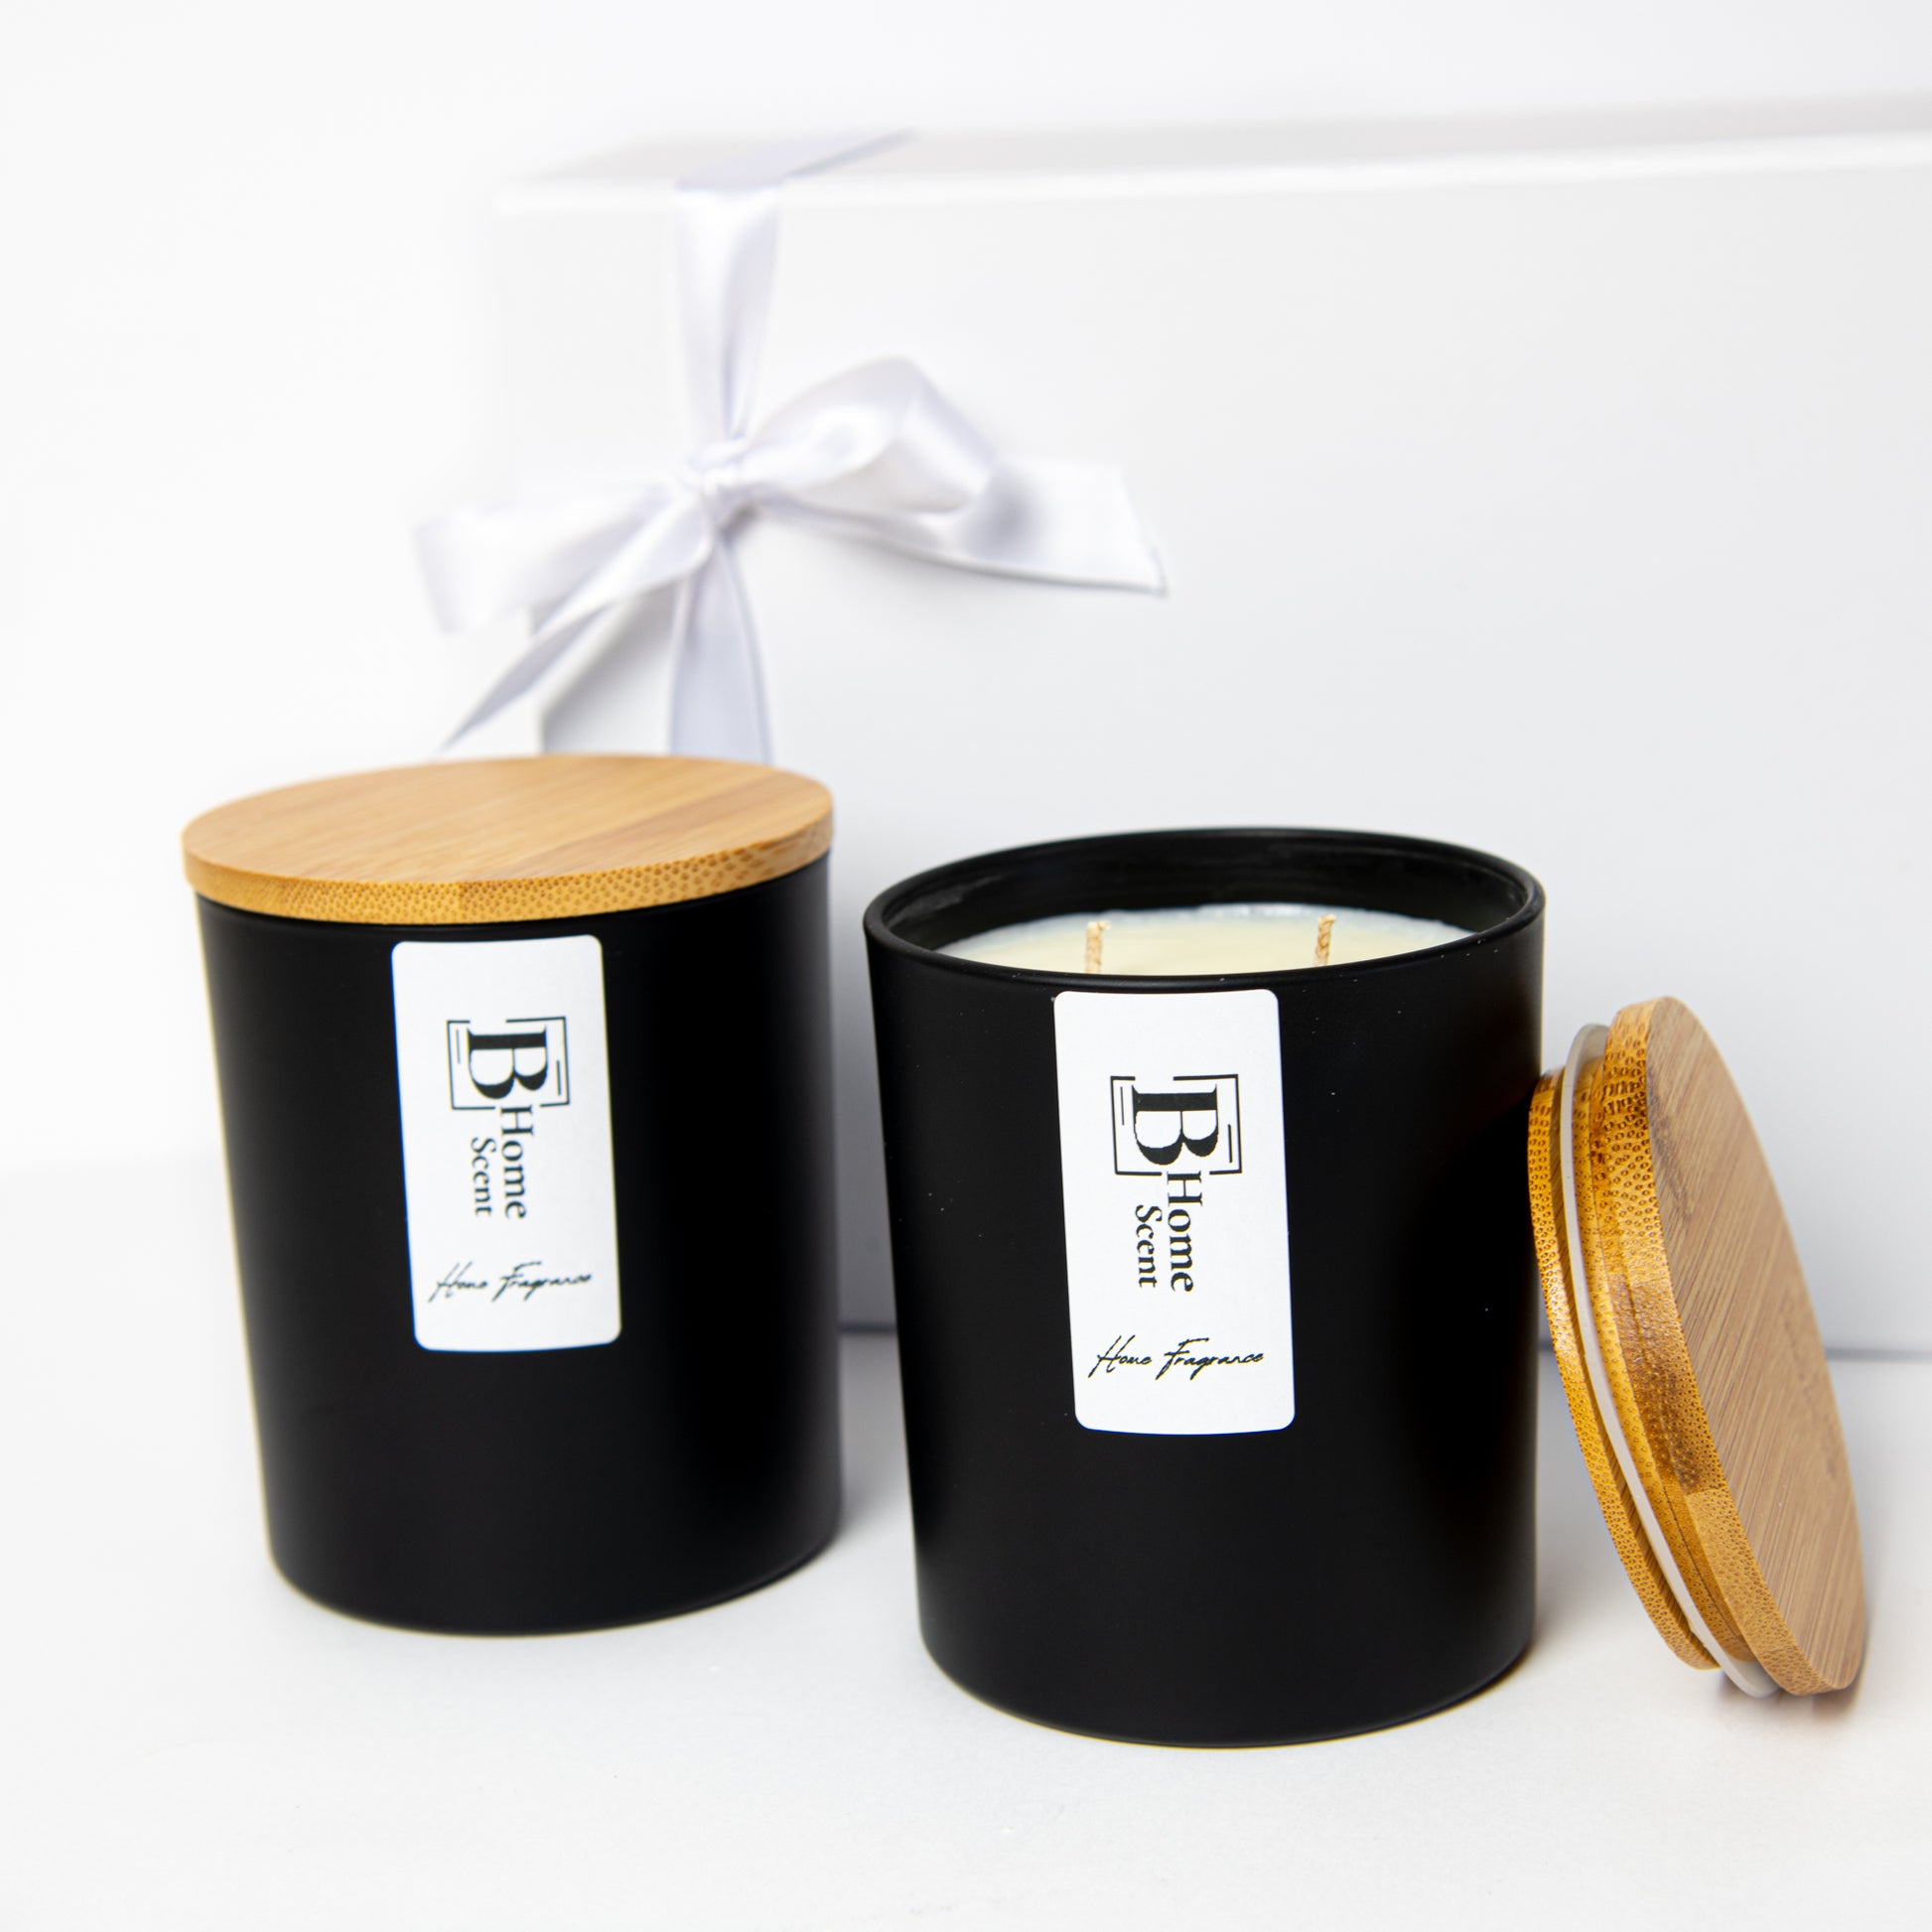 2 candles with wooden lids with gift box